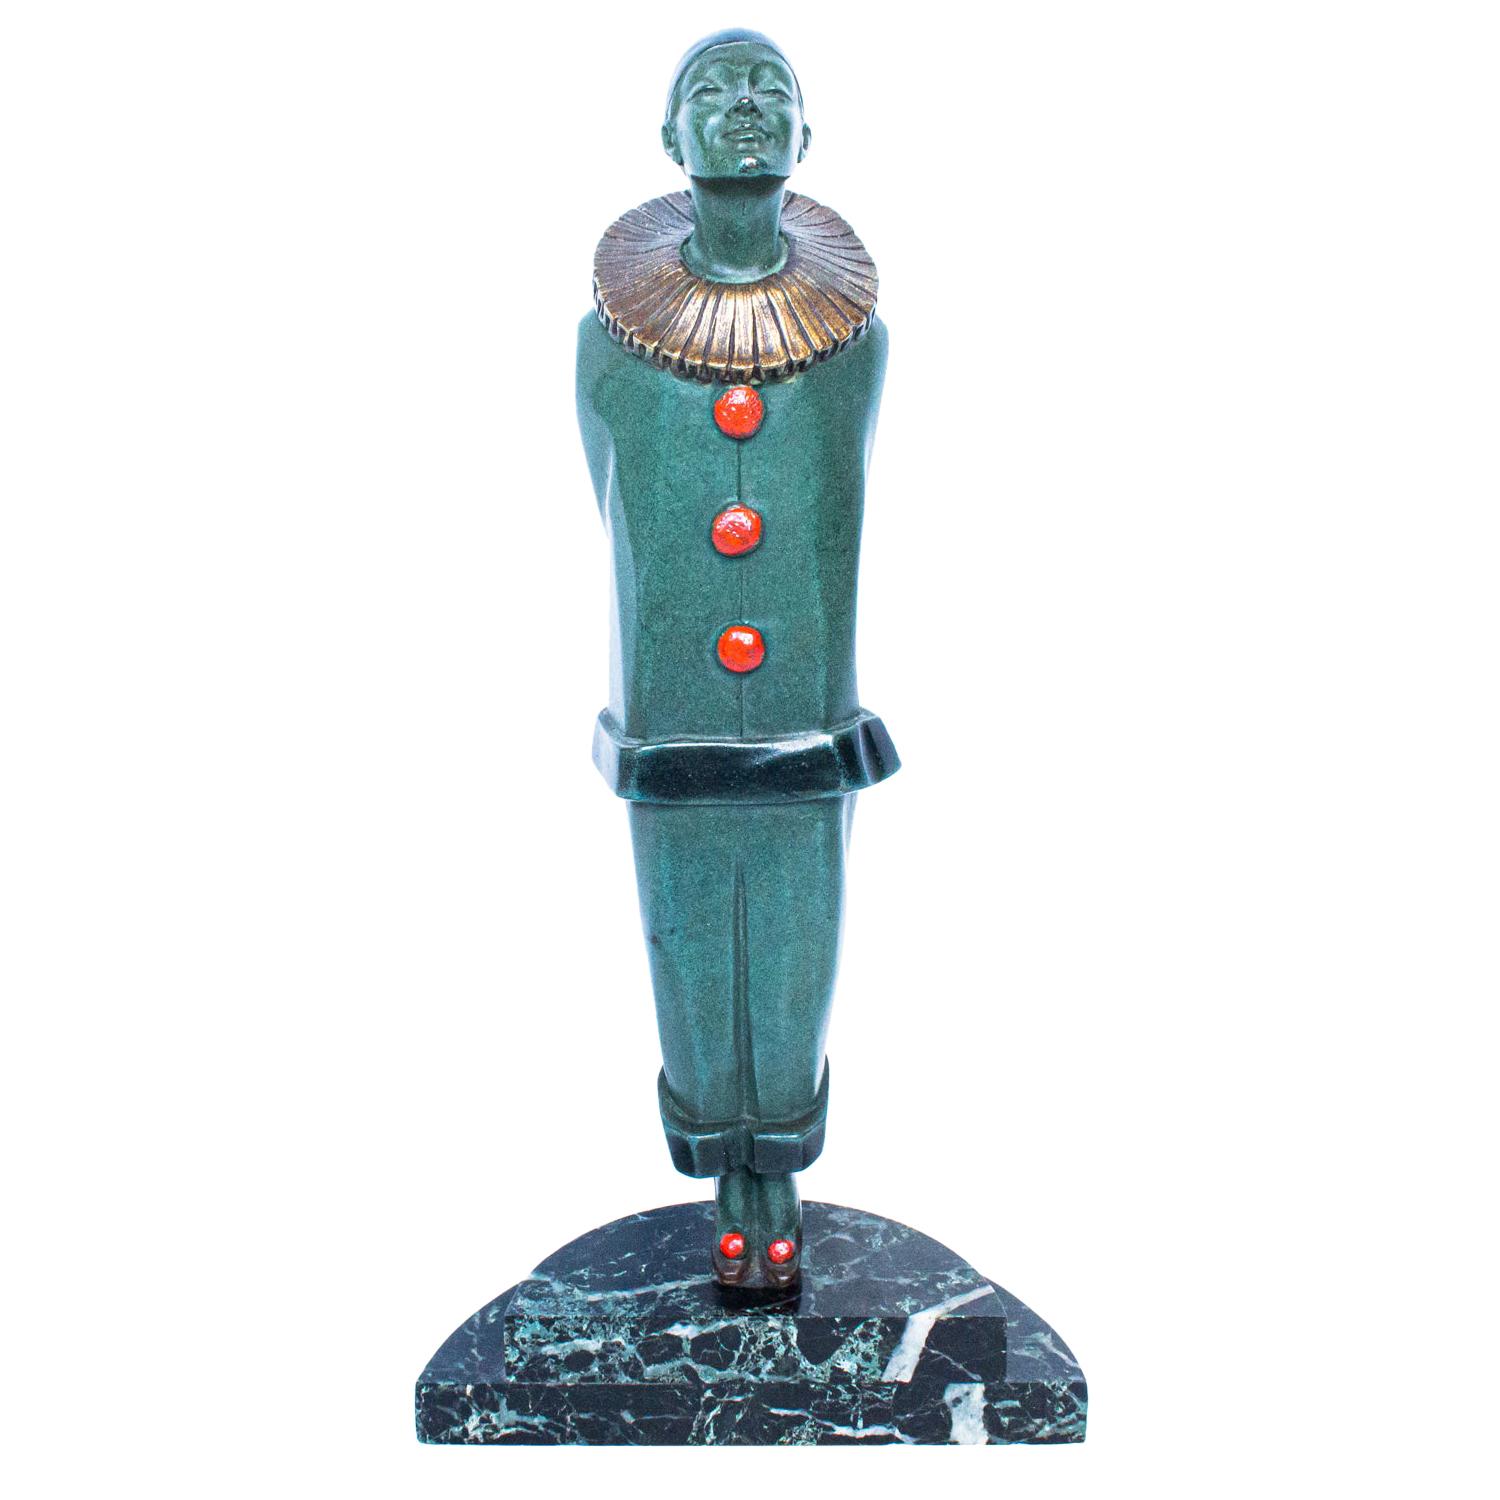 "Pierrot" Art Deco Bronze Figure of a Pantomime Character by Marcel Bouraine